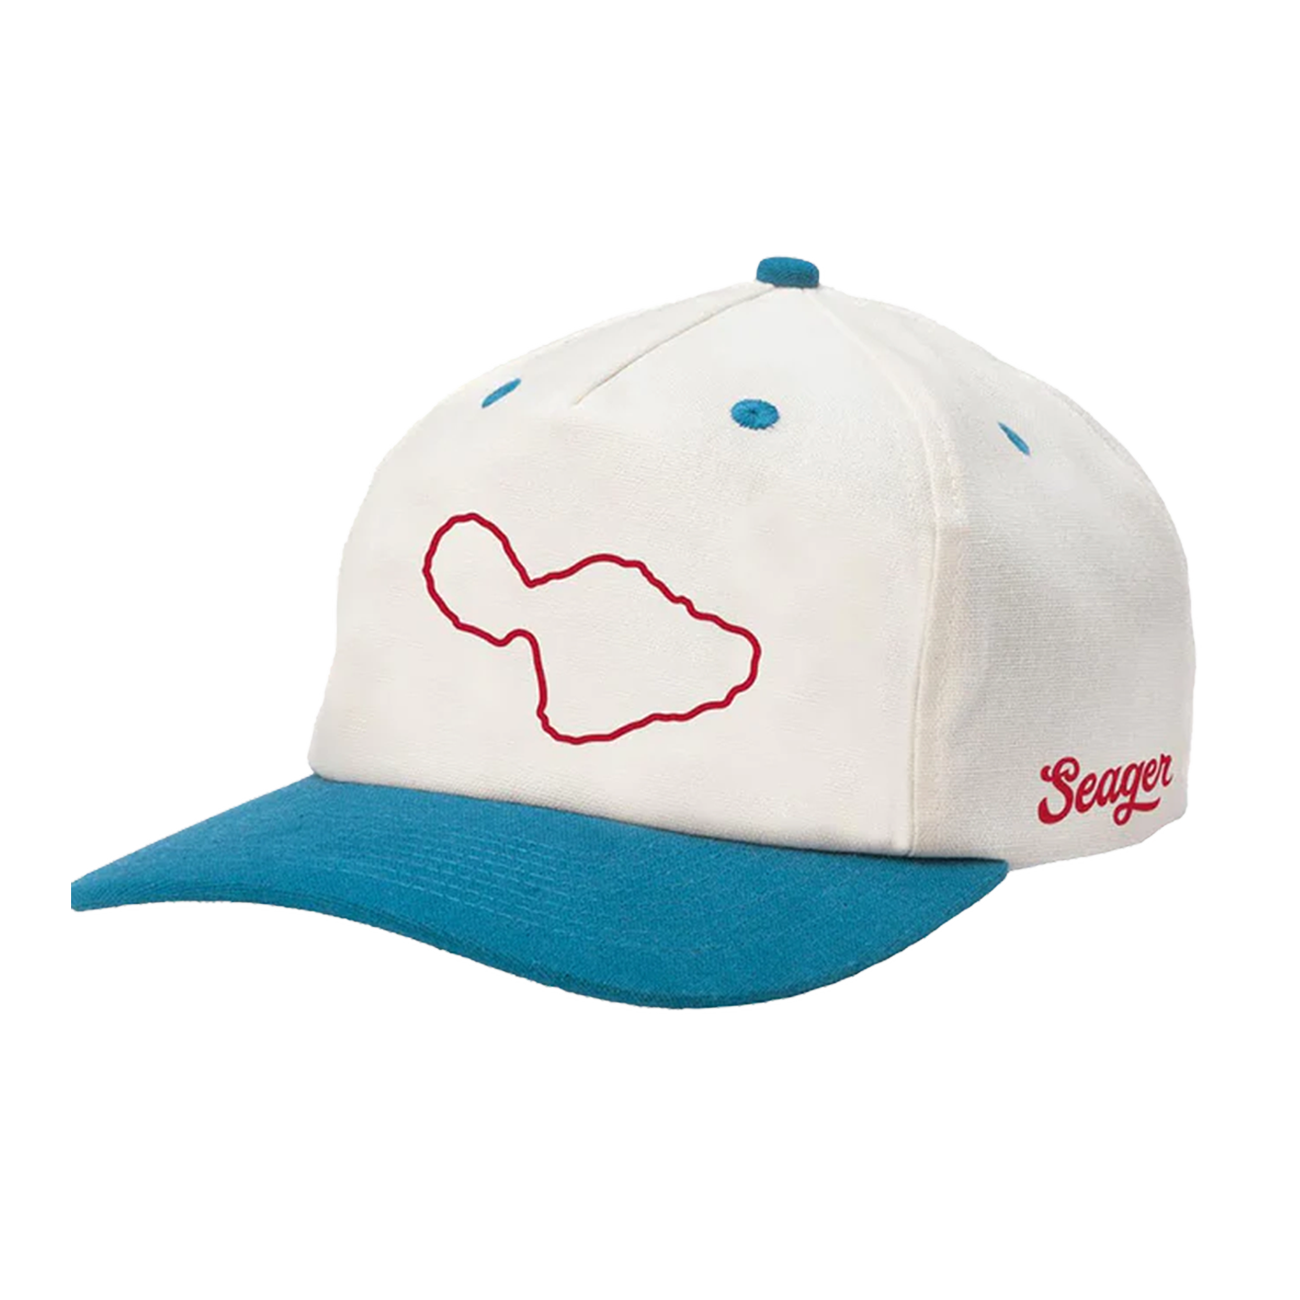 White hat with teal brim with red outline of Maui island and Seager logo on side